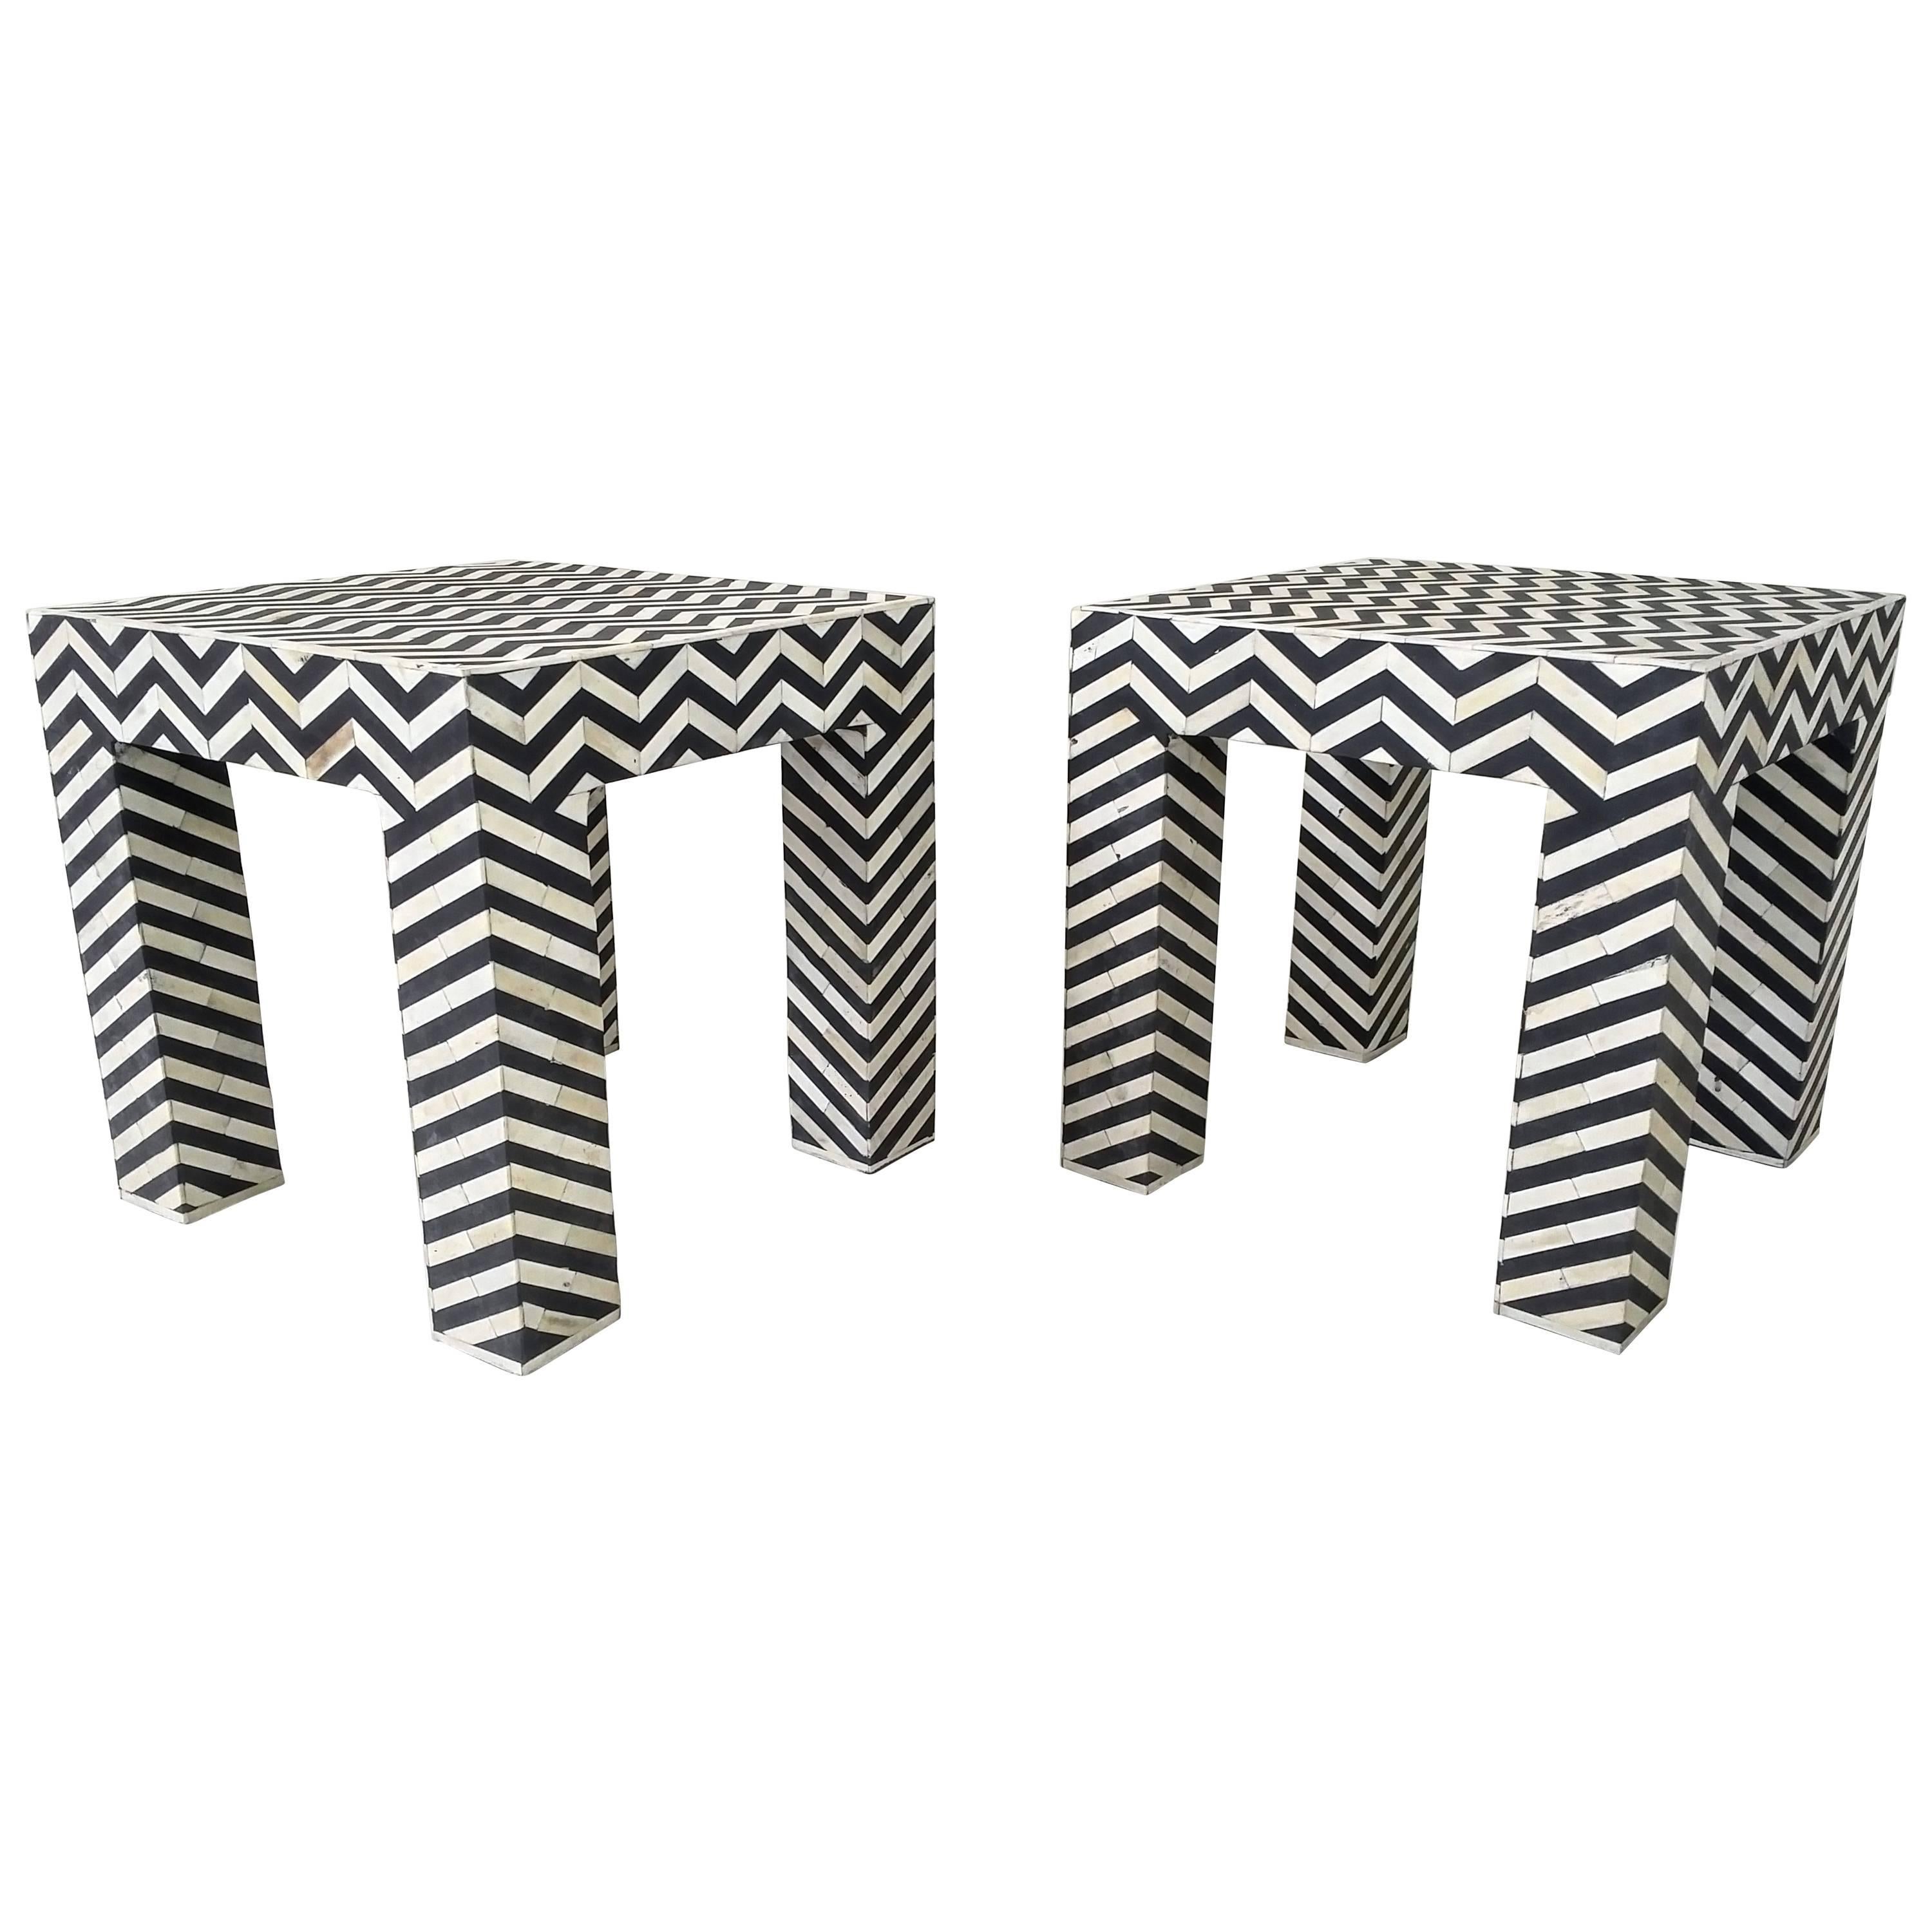 Geometric Patterned Black and White Bone Inlay Side Tables